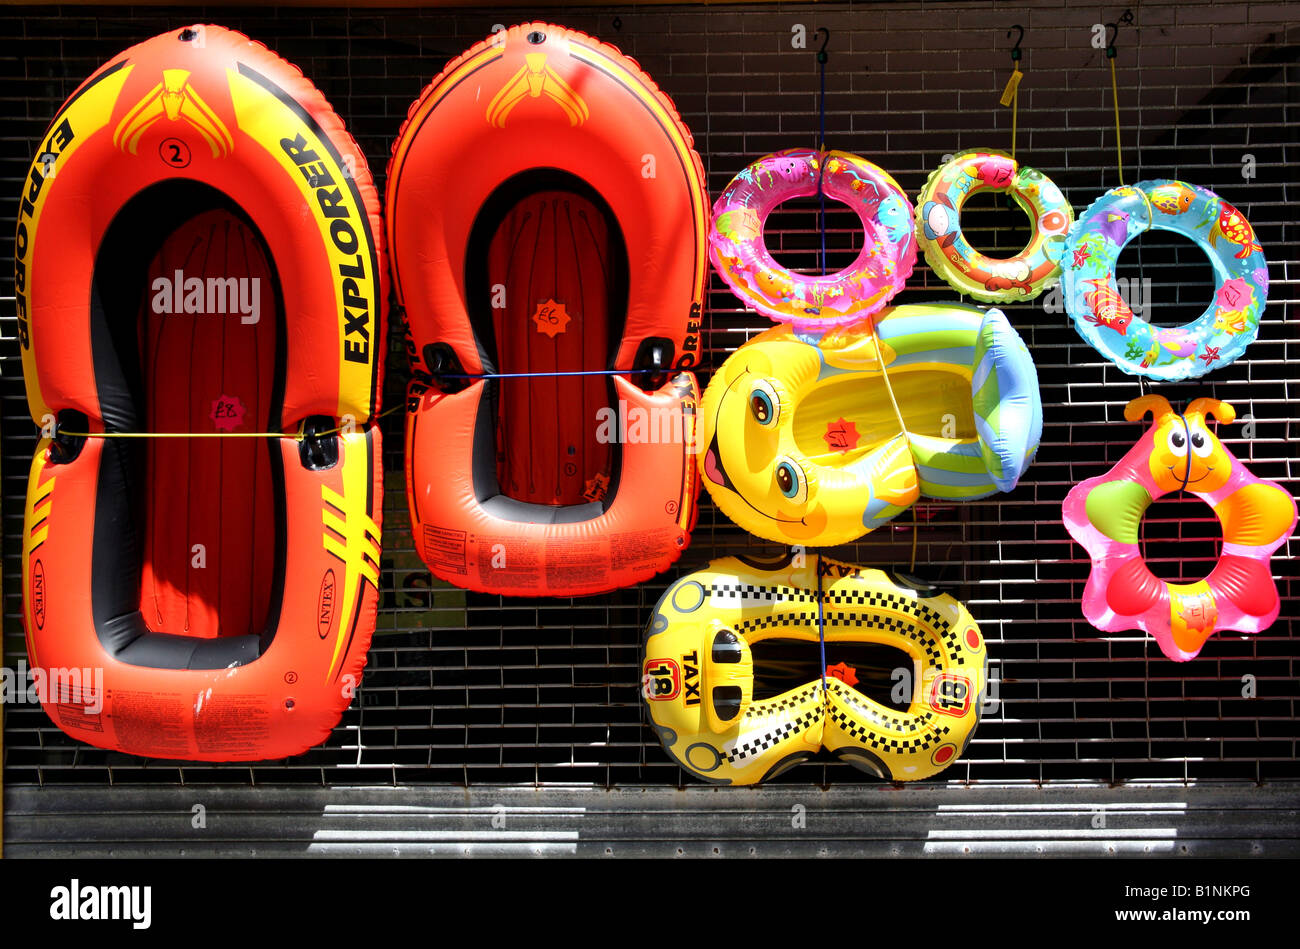 Inflatable beach toys on display outside shop, England Stock Photo